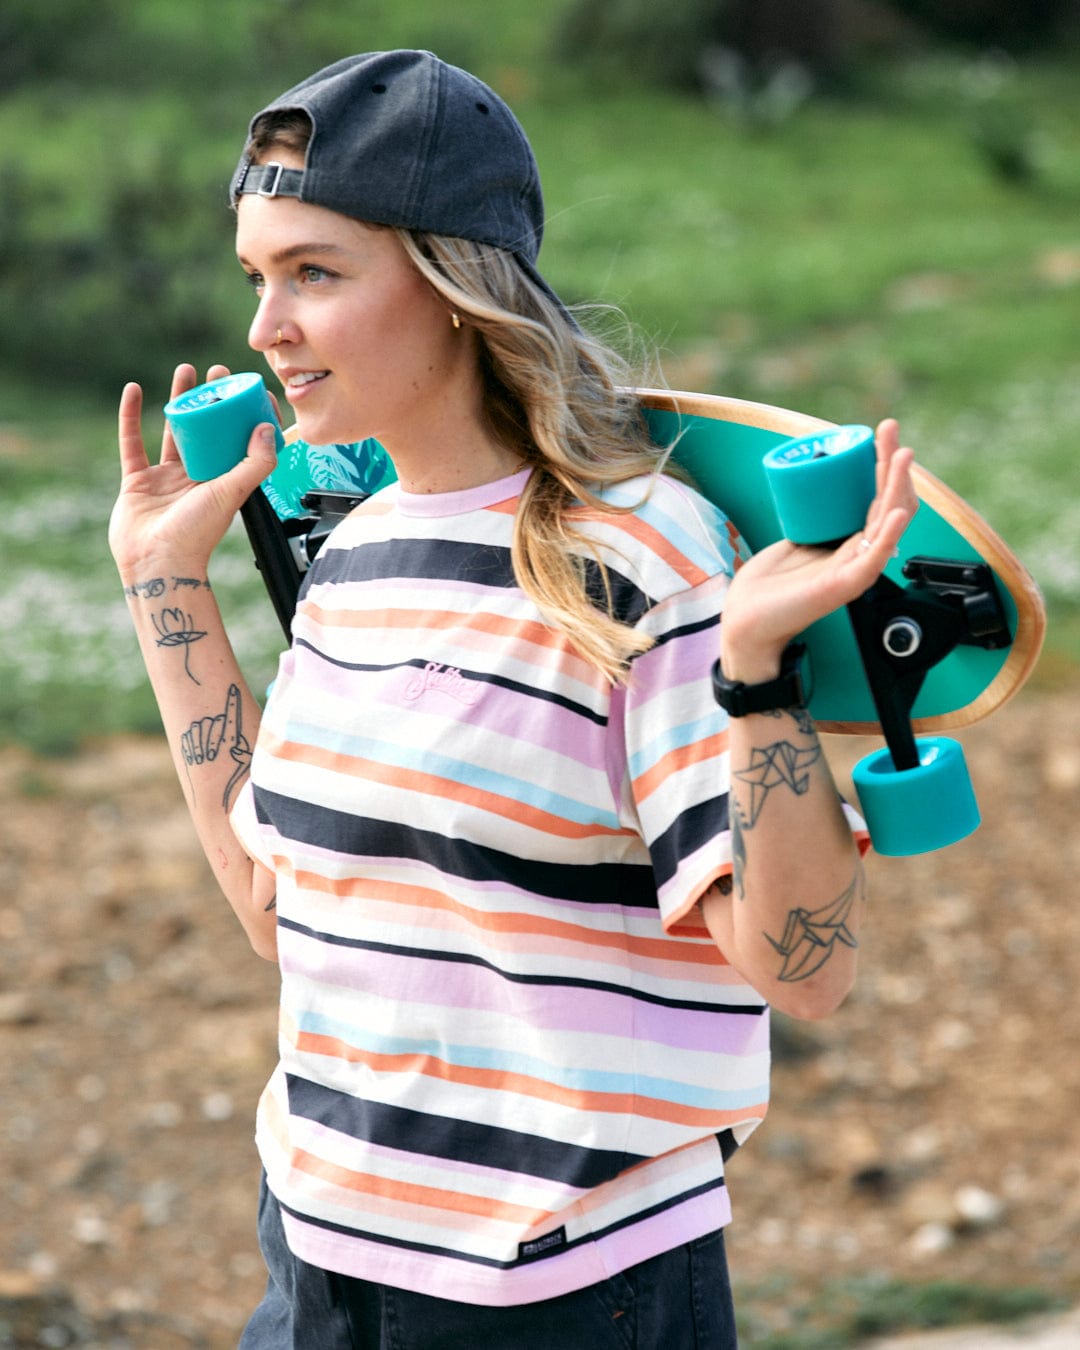 A person with a backward baseball cap carrying a skateboard with a Juno - Womens Short Sleeve T-Shirt - Multi design over their shoulder by Saltrock.